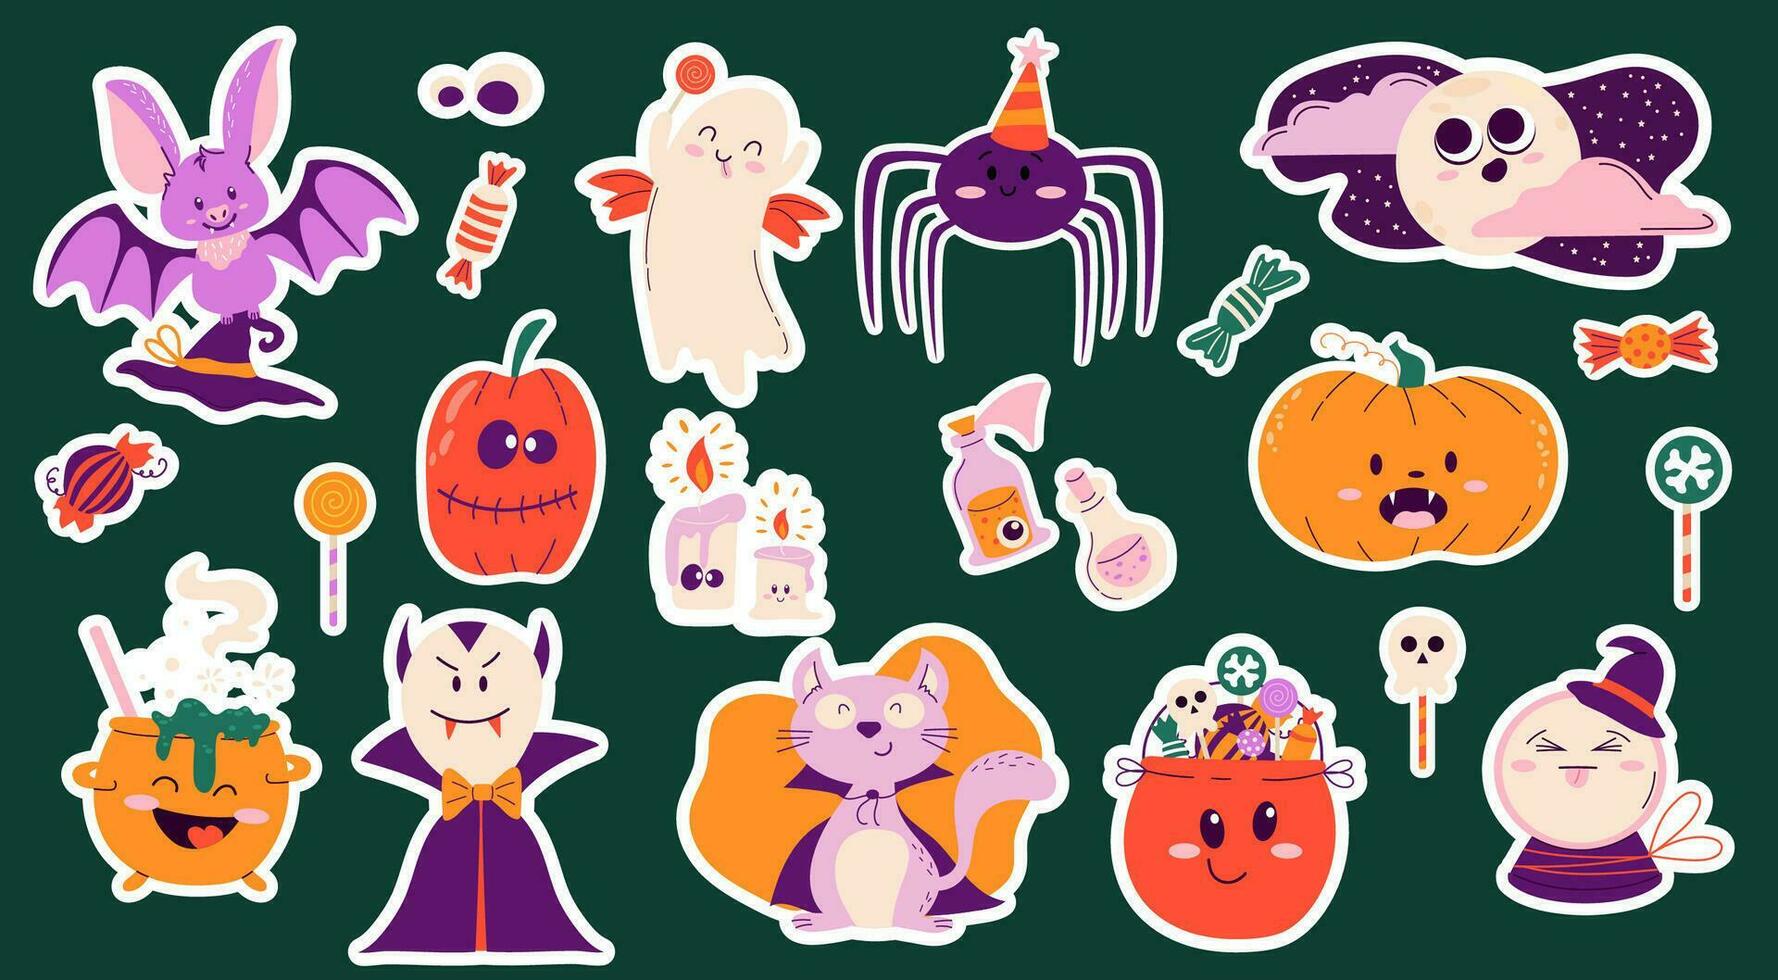 Colourful handdrawn Halloween mascot characters sticker set. Creepy pumpkin, happy cauldron, shy candle, smiling ghost and spider, moon, little bat, candies and potion bottles. vector